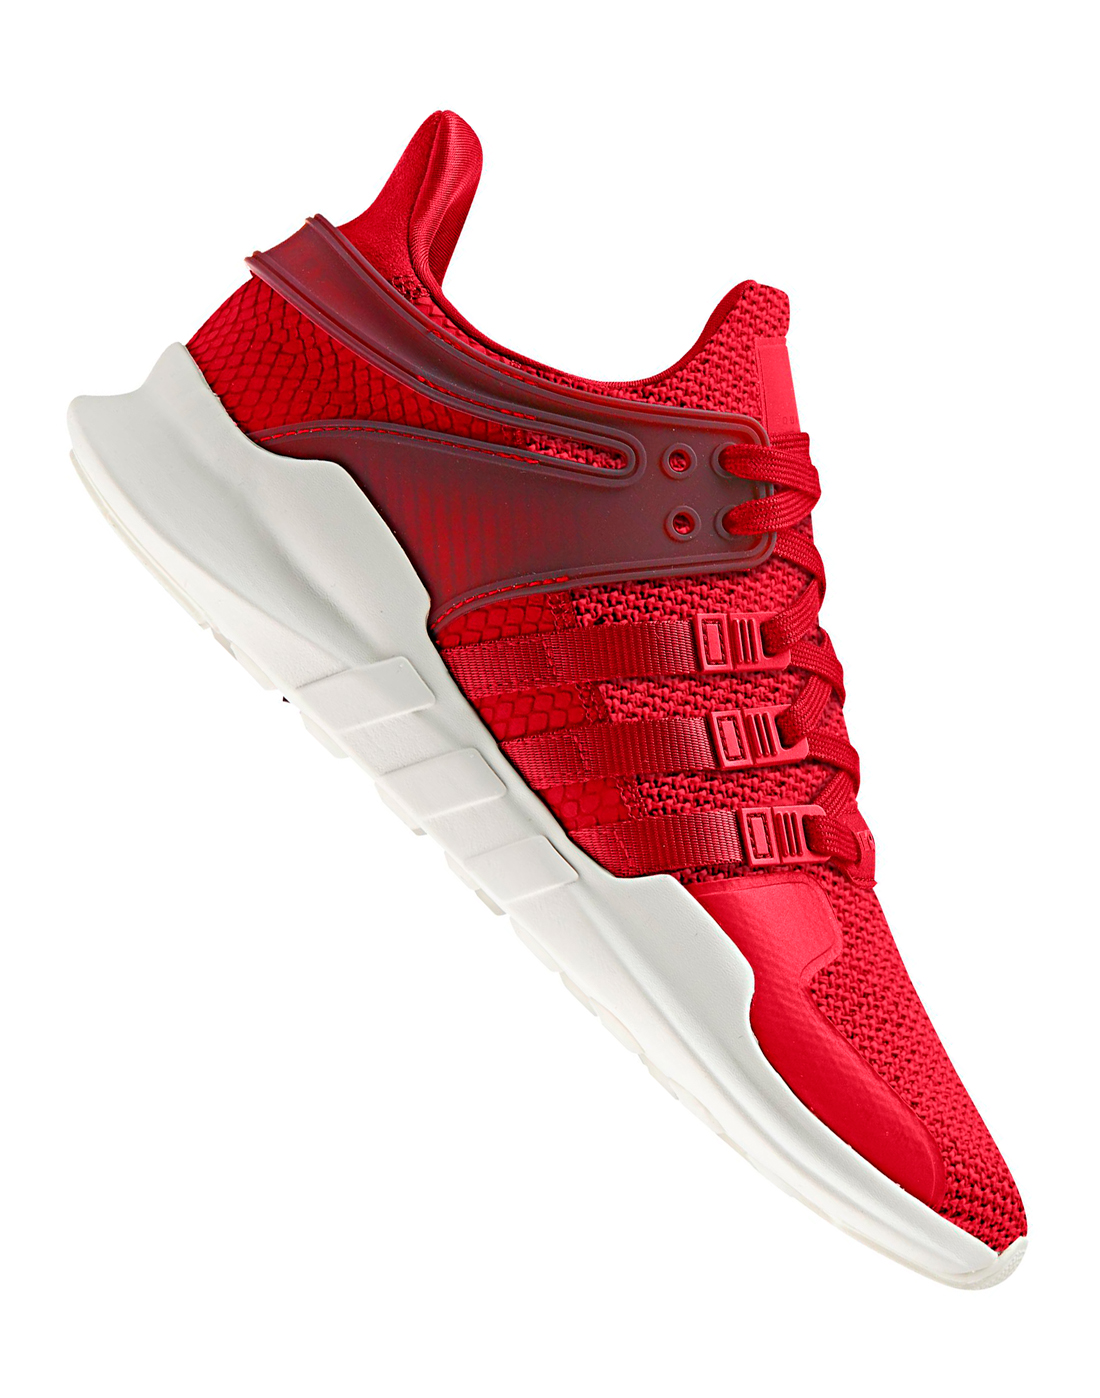 adidas eqt support adv mens red